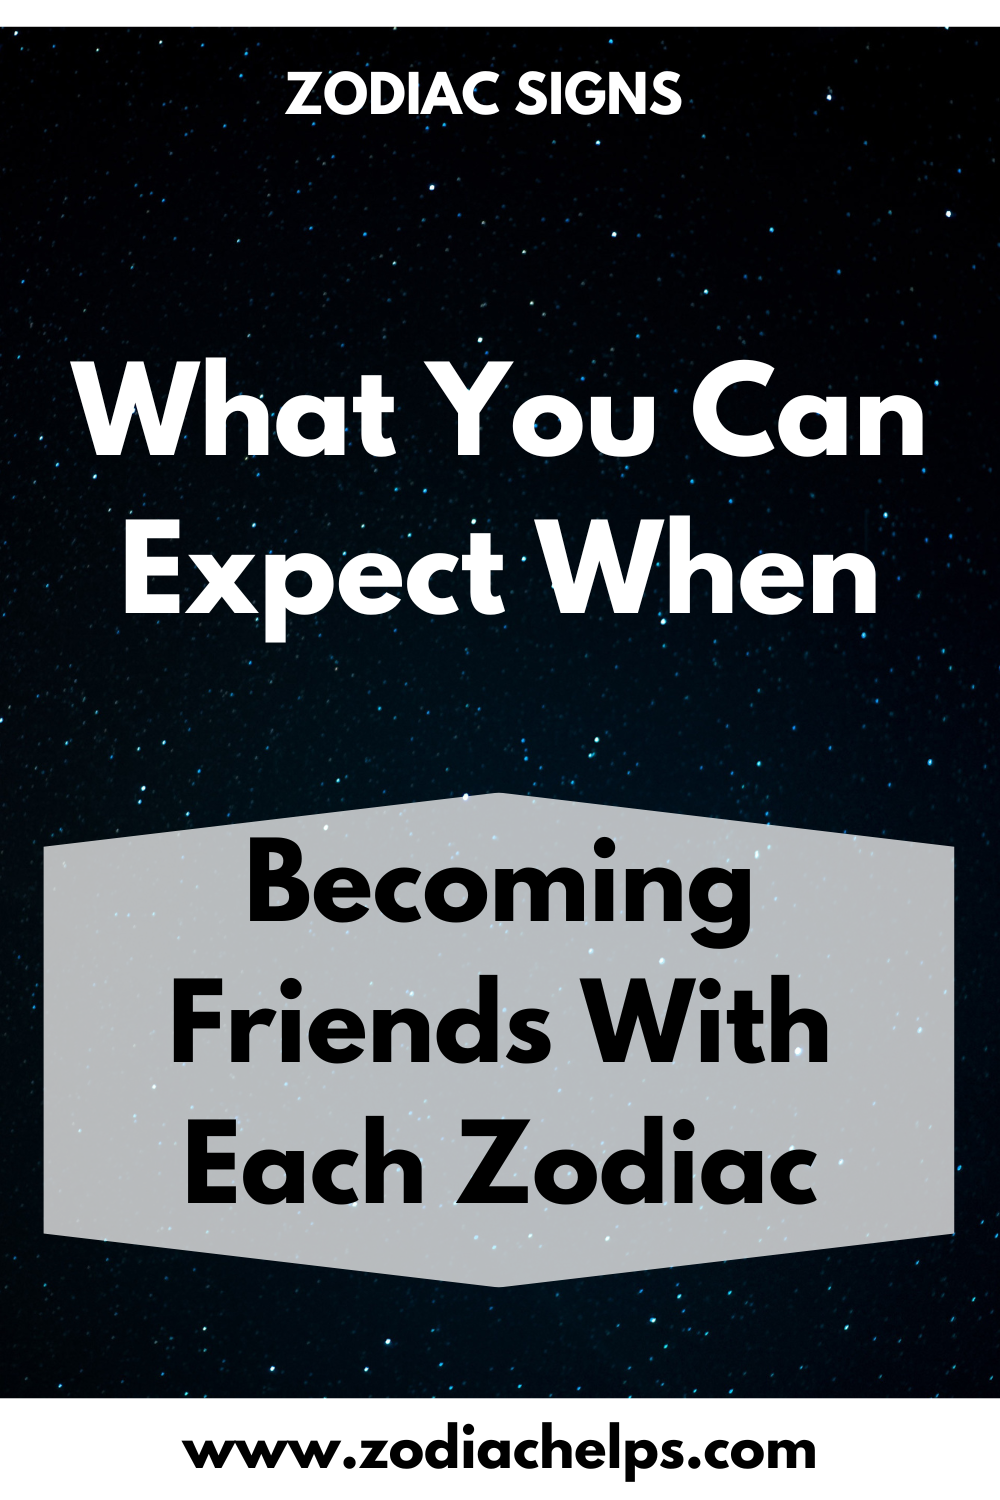 What You Can Expect When Becoming Friends With Each Zodiac